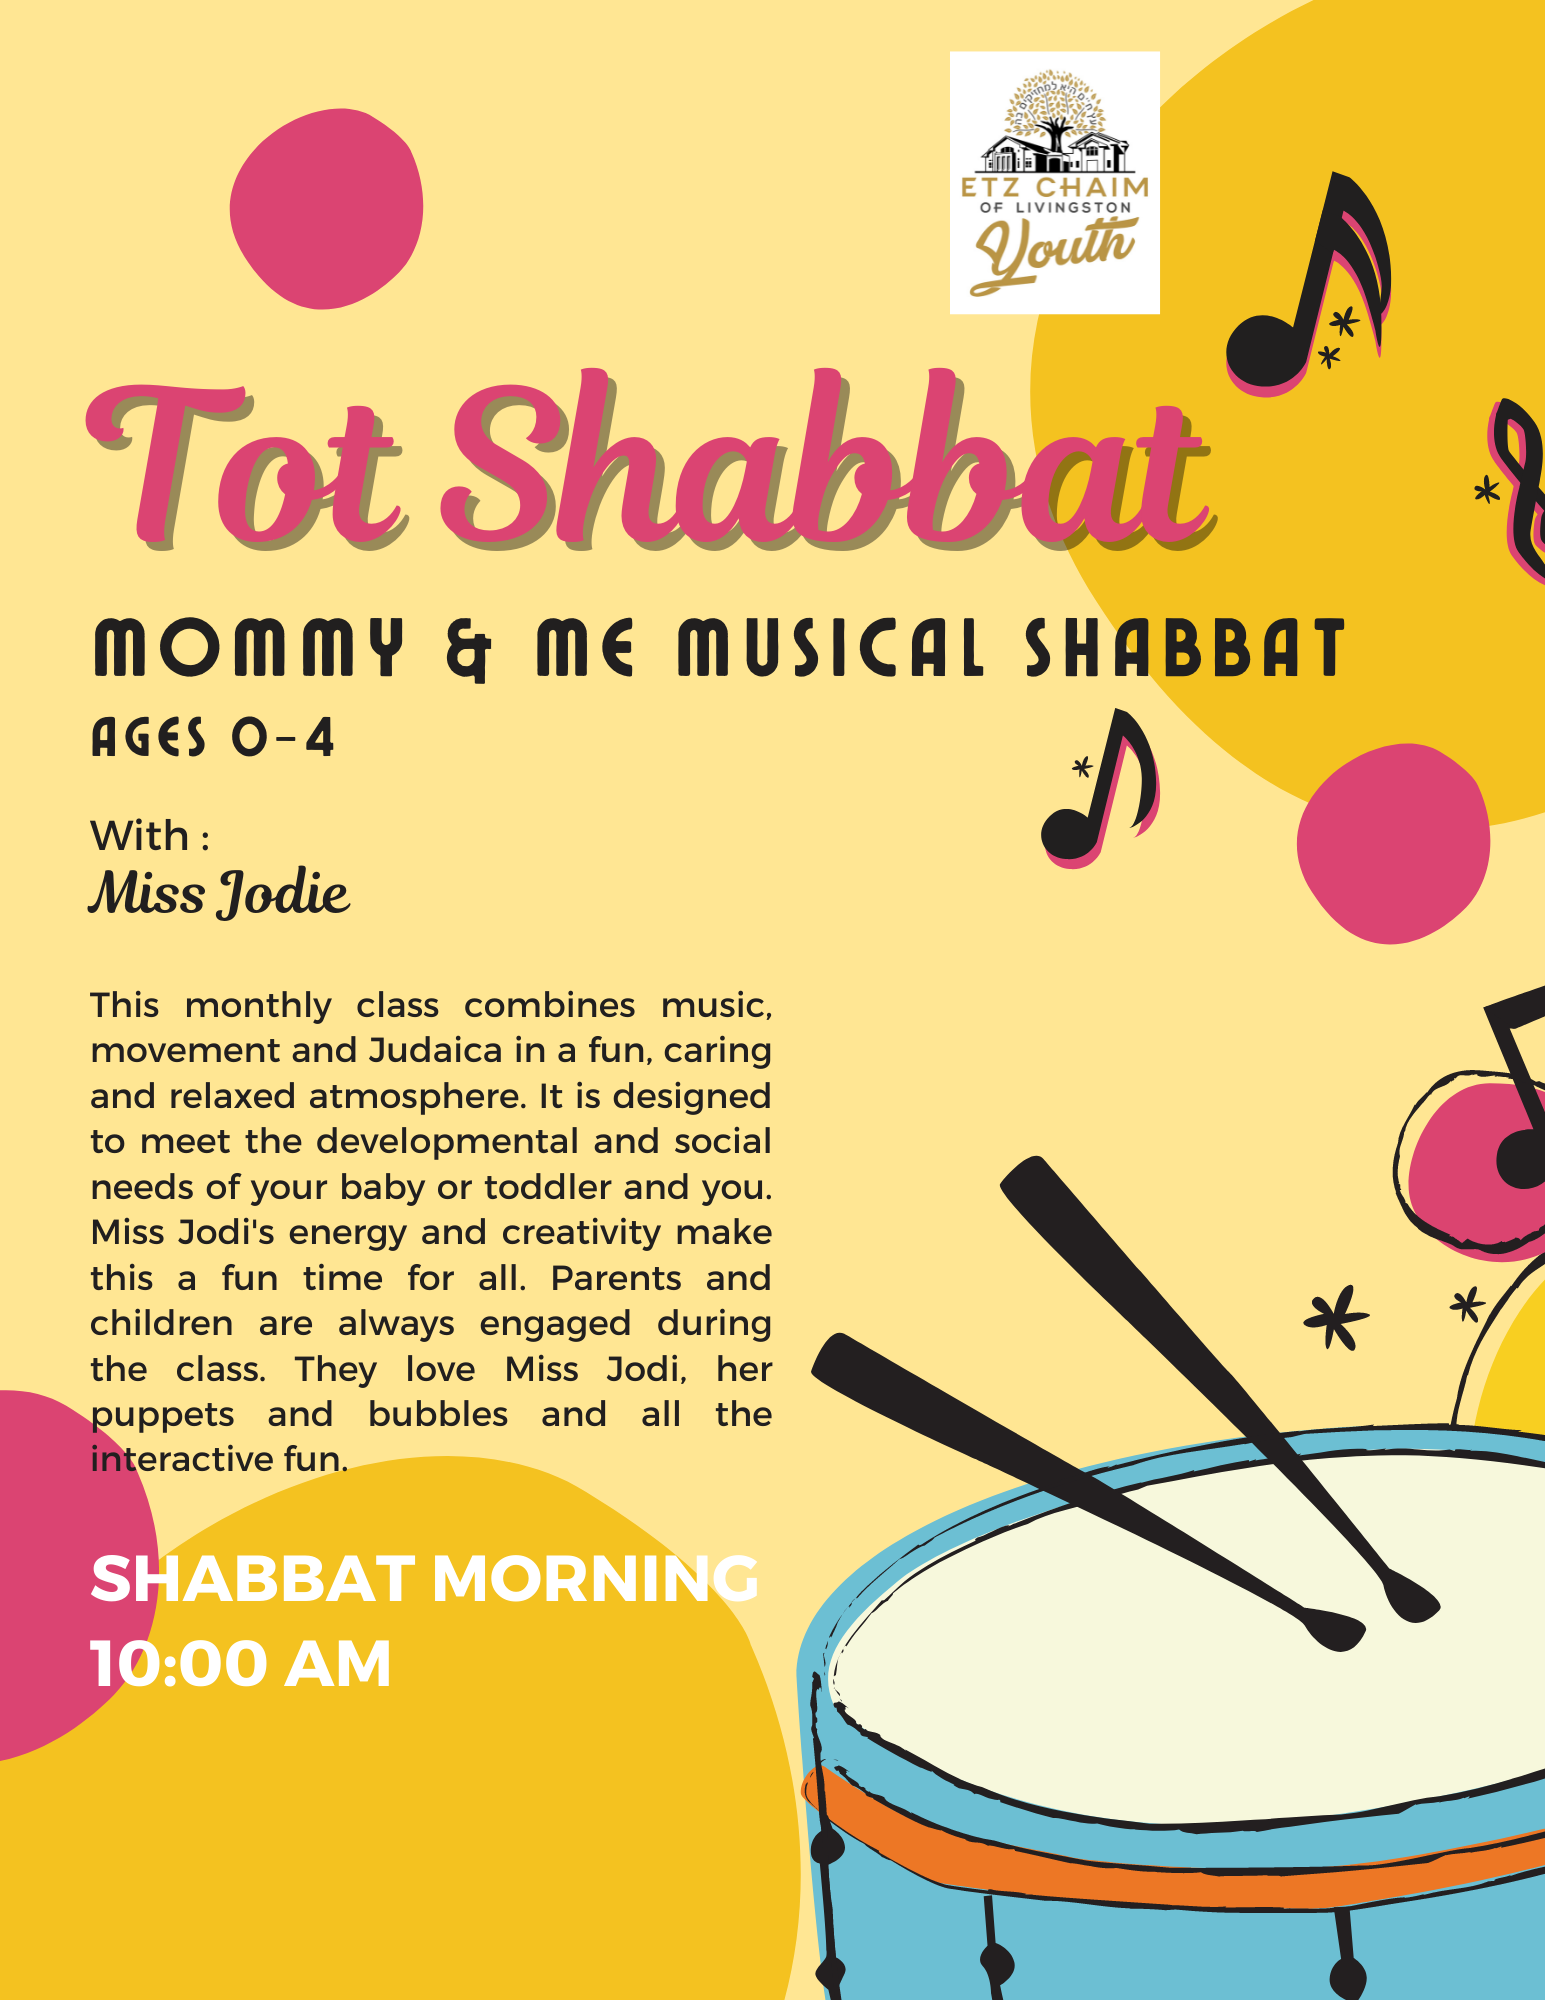 YOUTH: Mommy & Me Musical Shabbat with Miss Jodie